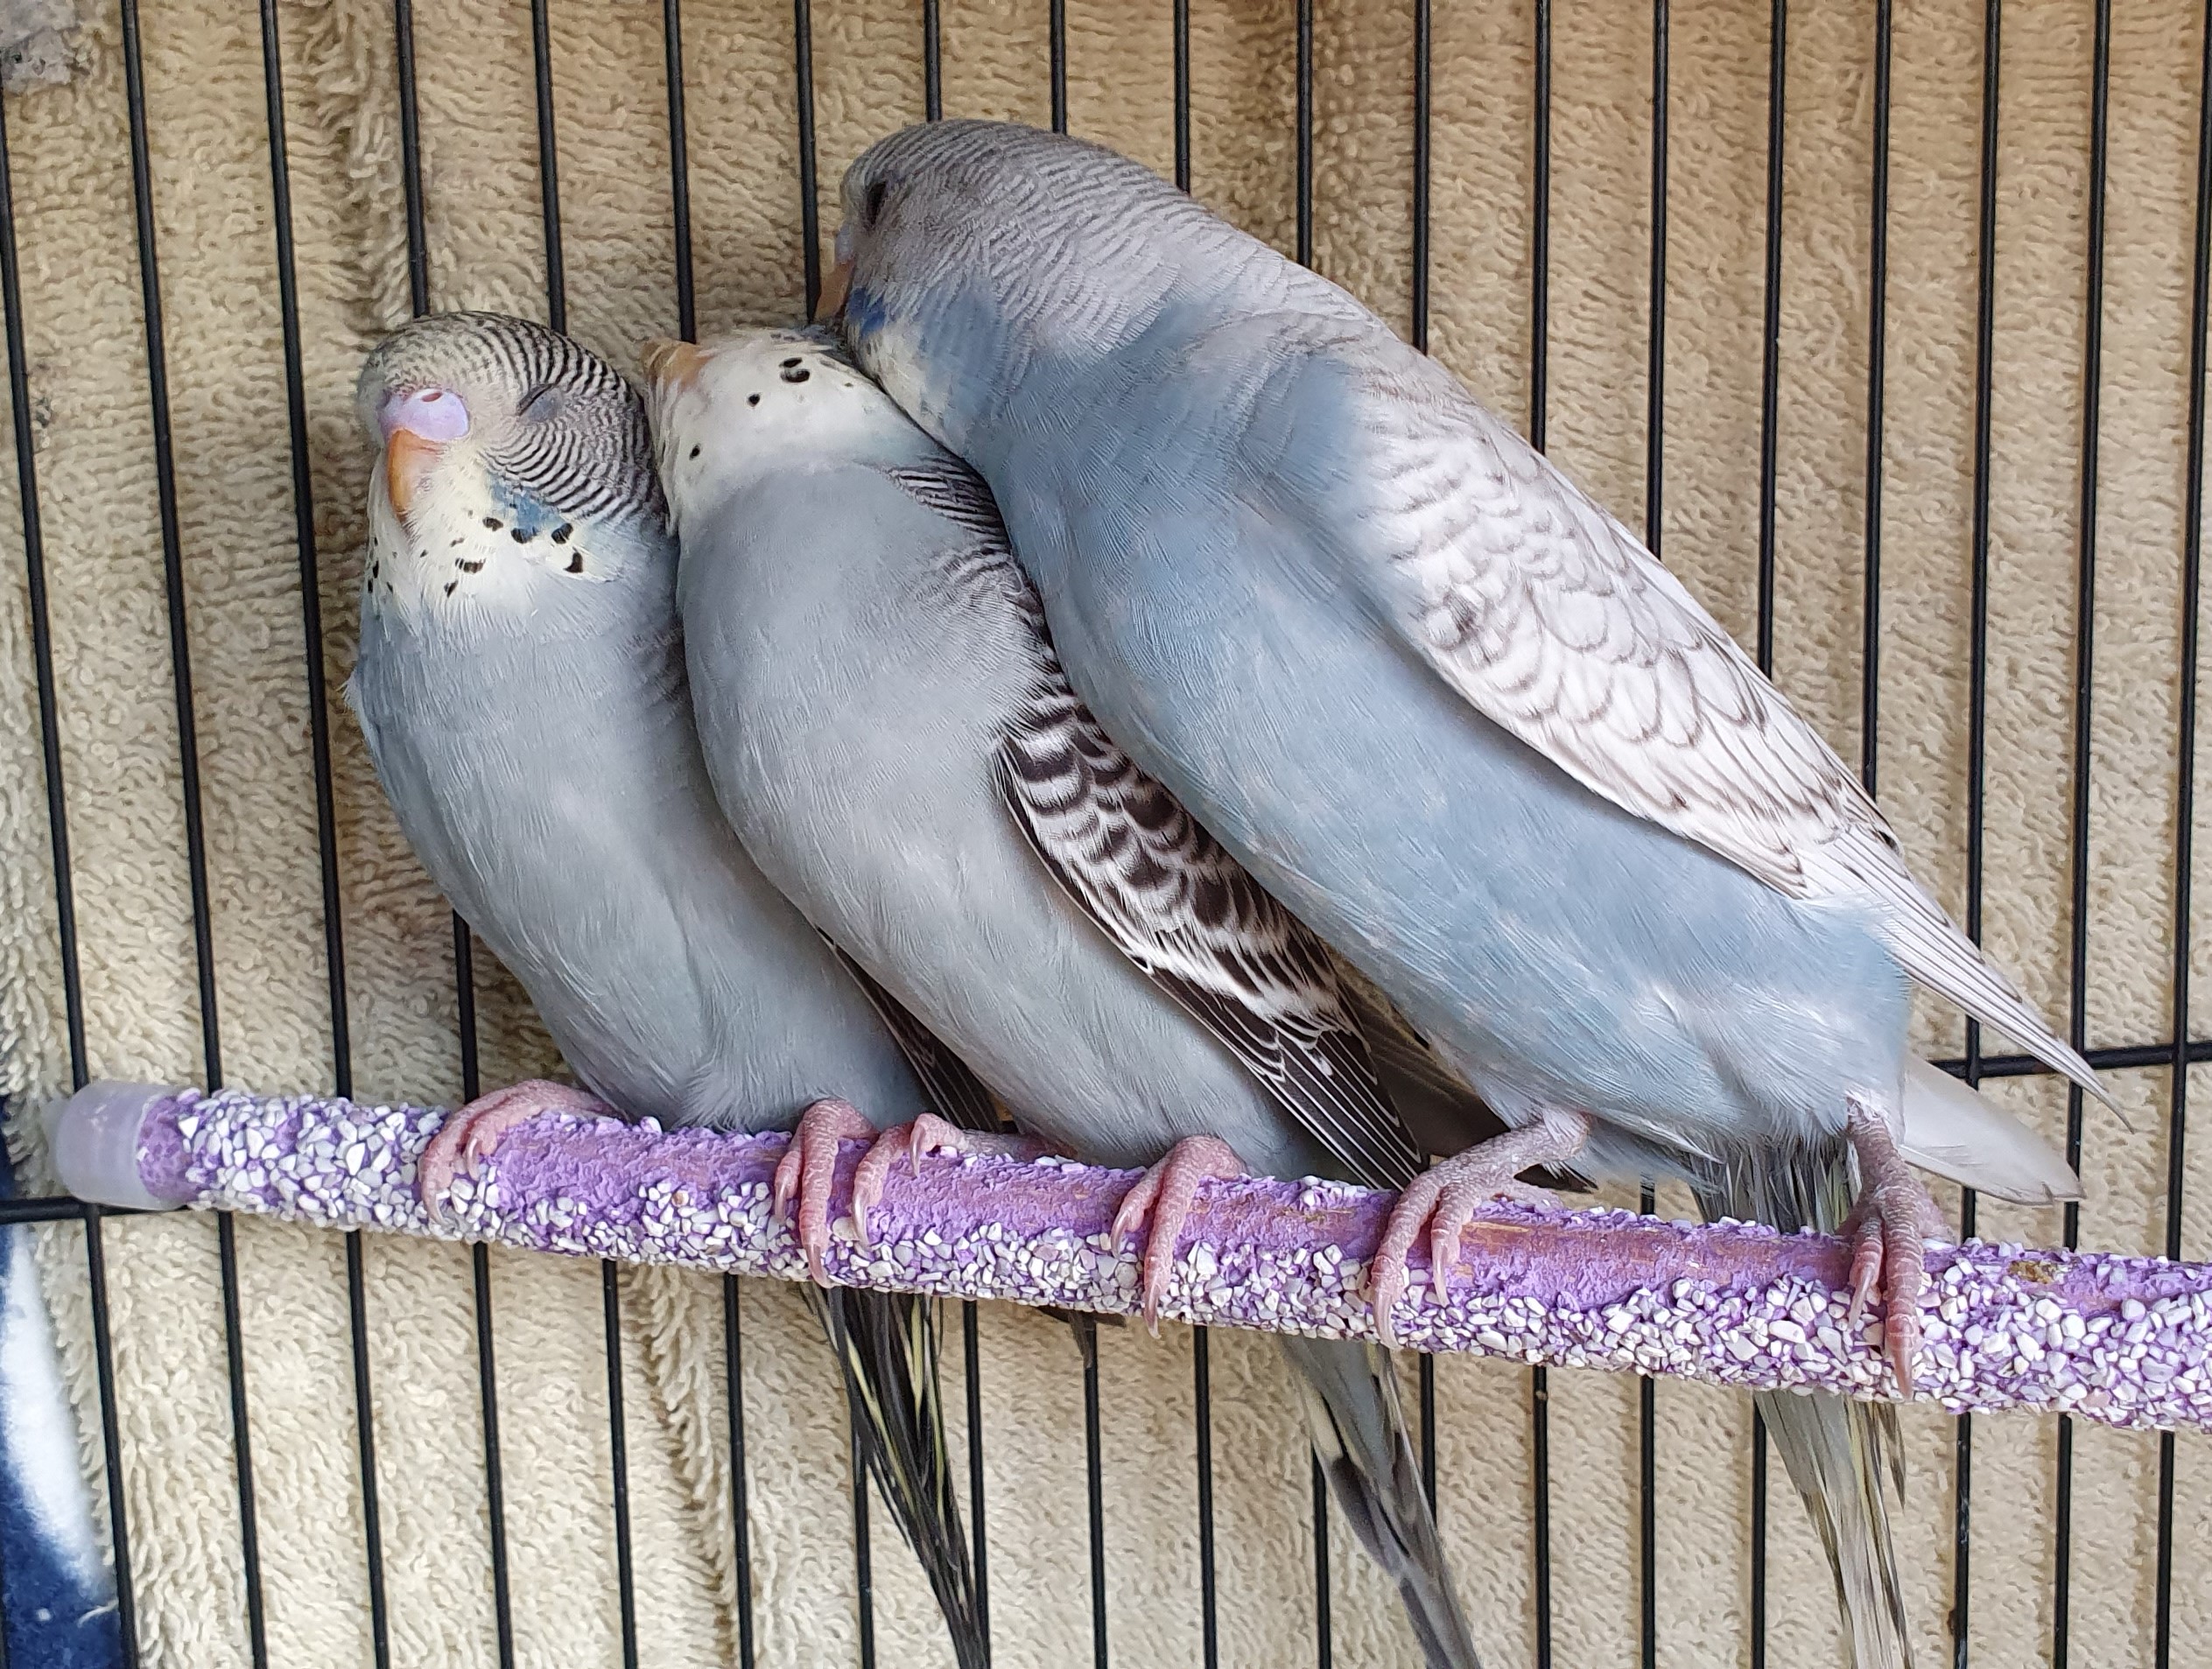 Budgies for sale in Geelong, pick-up only. Young, healthy budgerigars direct from the seller